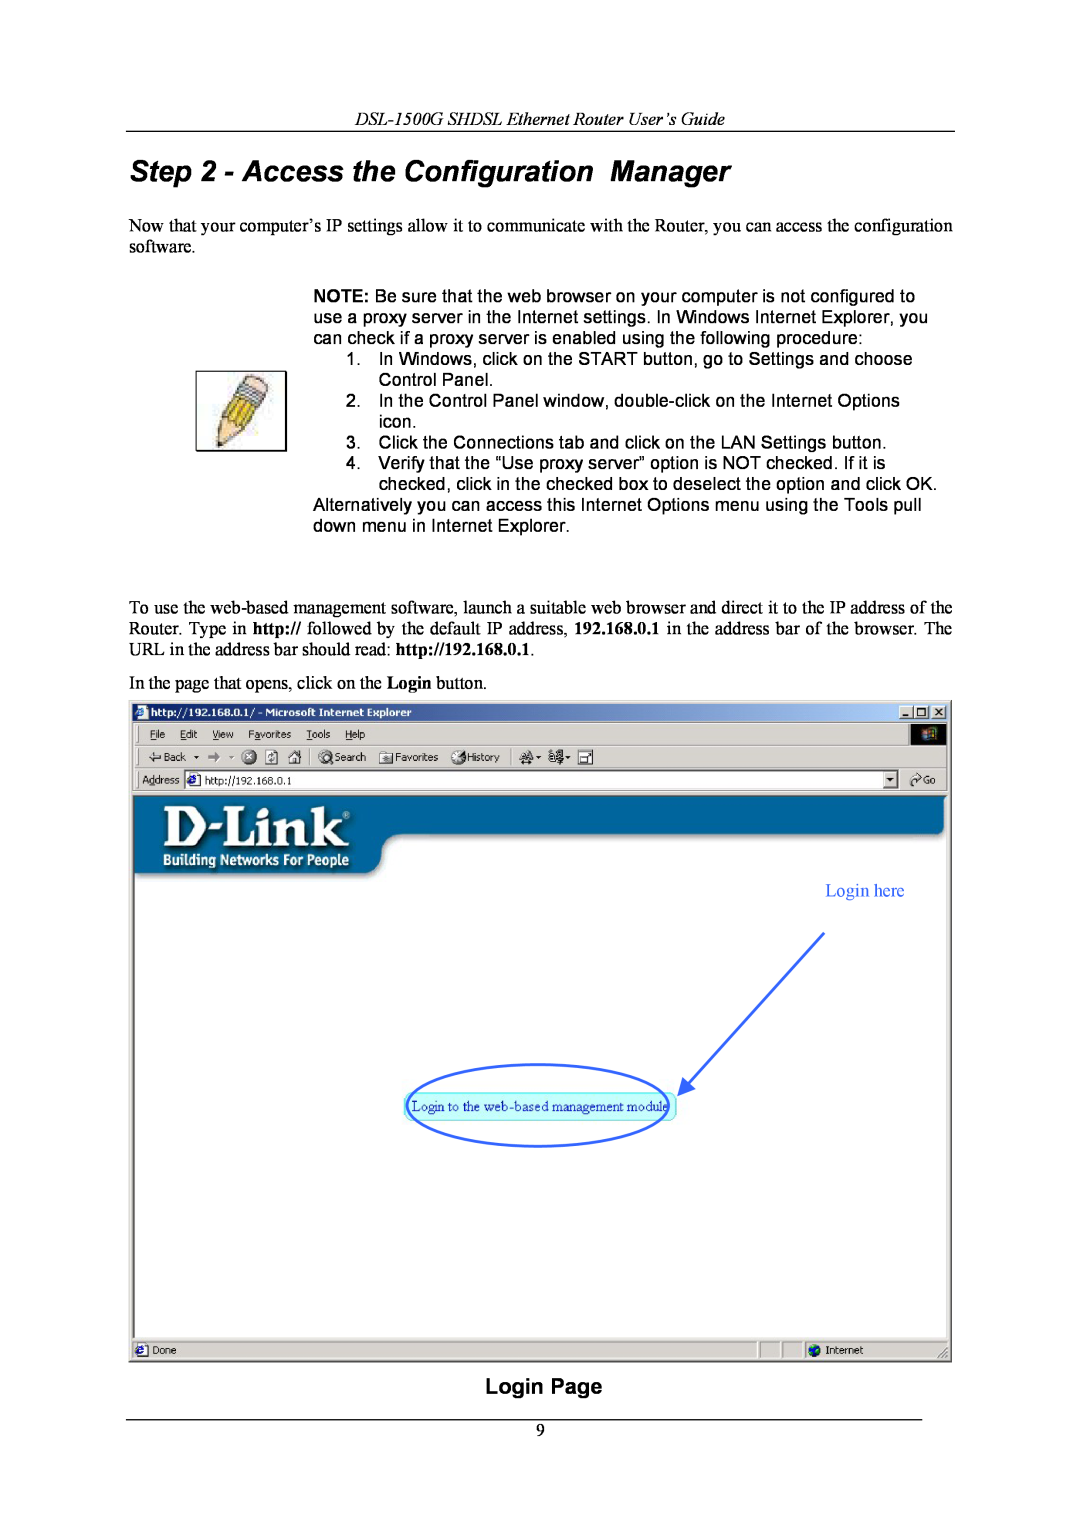 D-Link manual Access the Configuration Manager, Login Page, DSL-1500G SHDSL Ethernet Router User’s Guide, Login here 